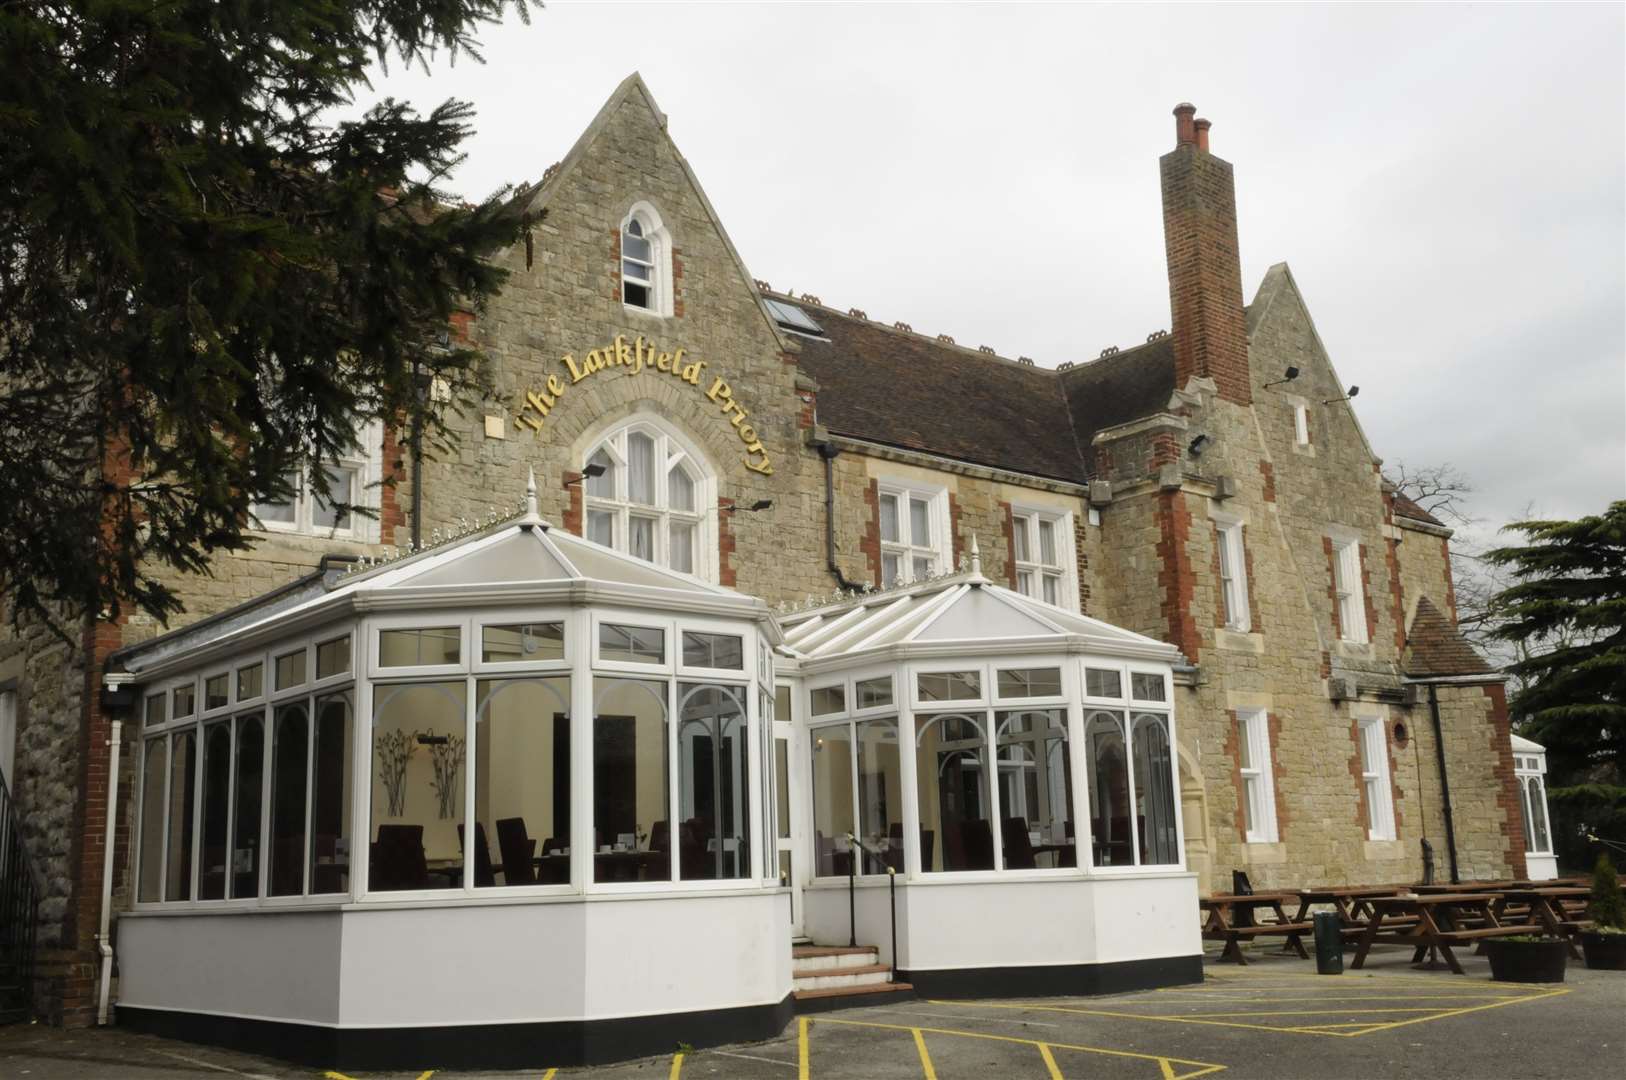 The Larkfield Priory Hotel